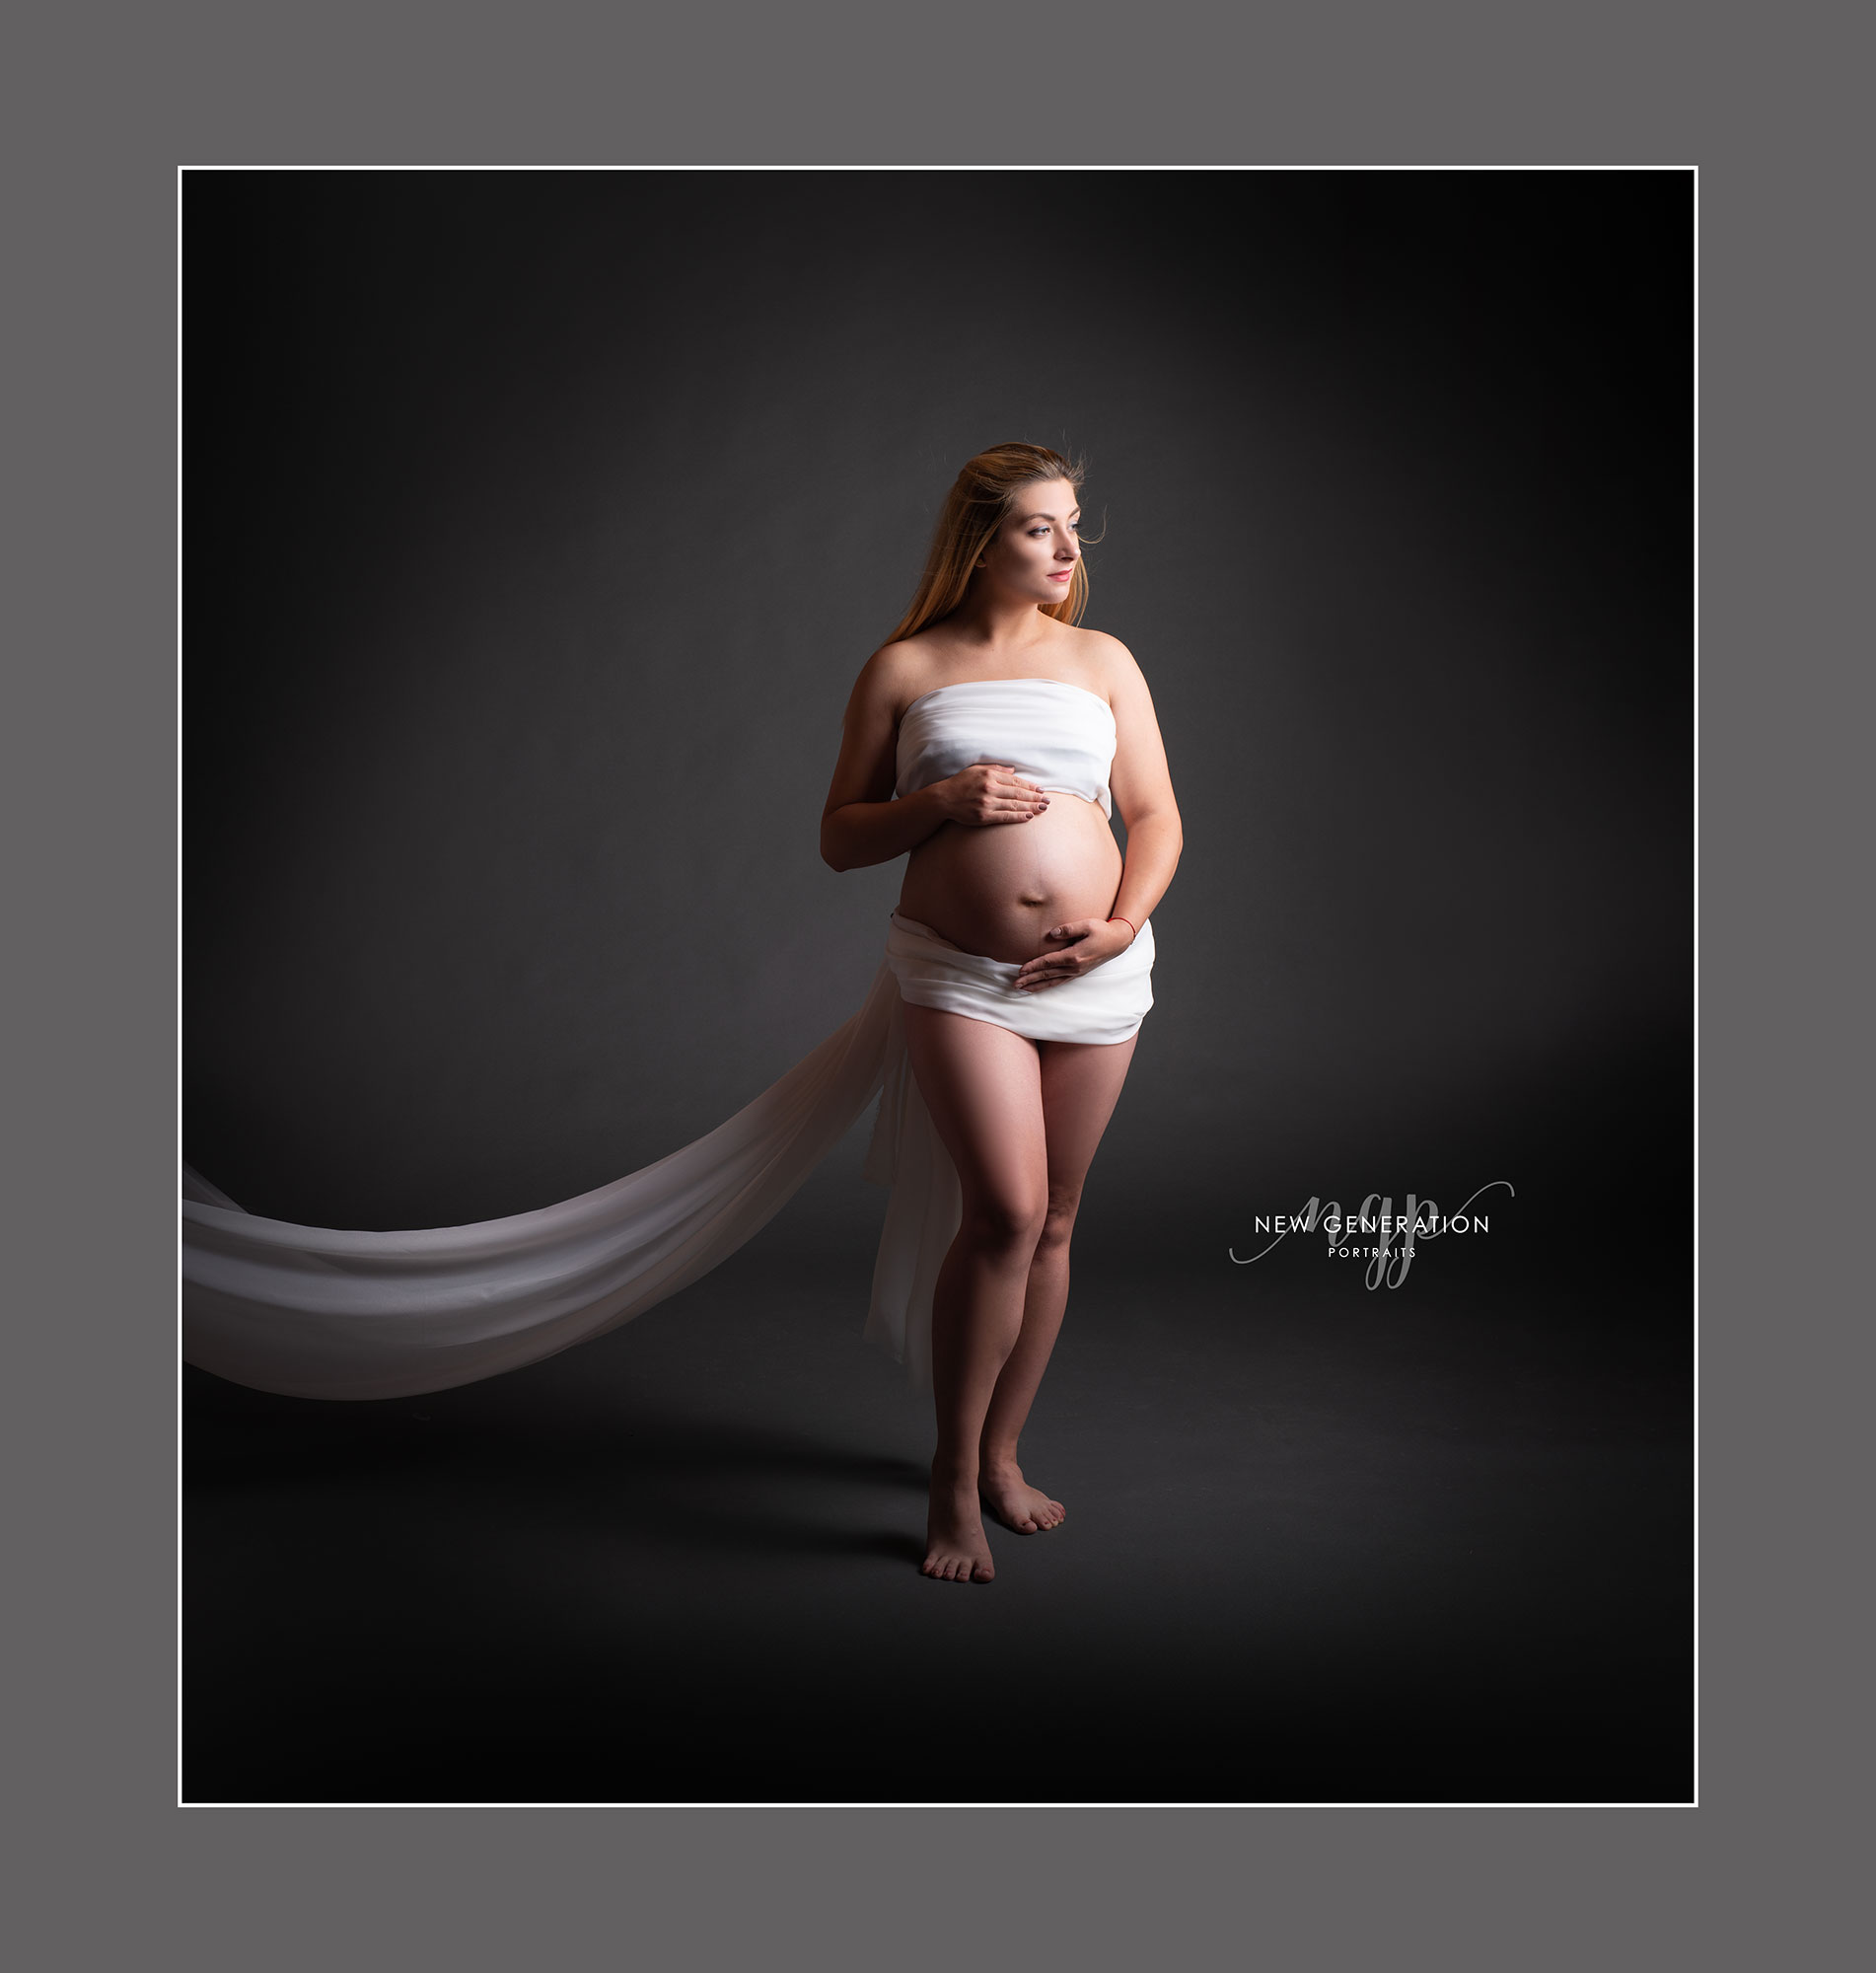 Pregnant lady wrapped white fabric in our wirral professional studio. Captured by New Generation Portraits.